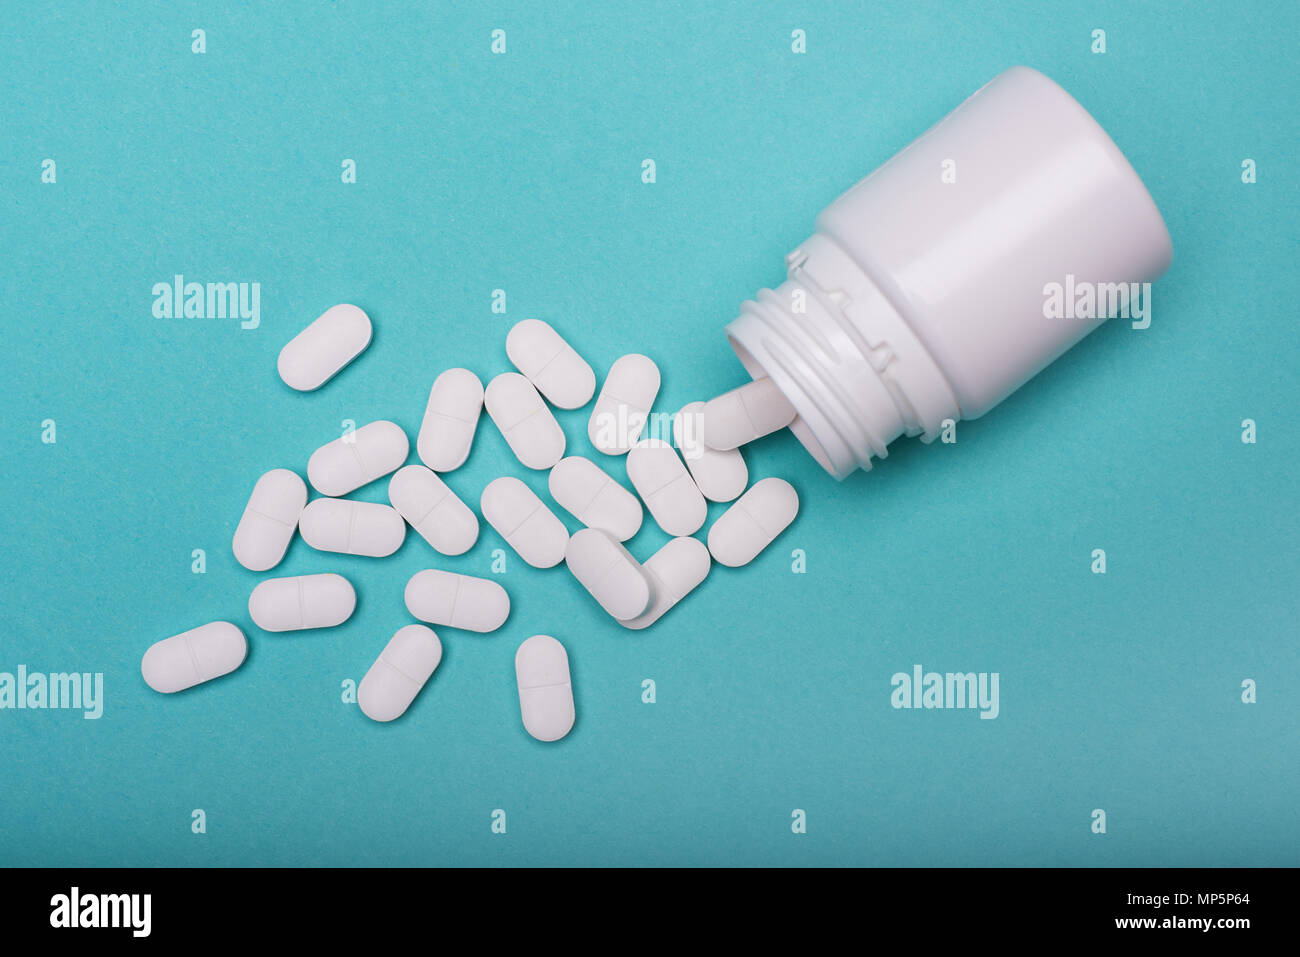 Medication bottle and white pills spilled on blue pastel coloured background. Medication and prescription pills flat lay background. Opioid epidemic. Stock Photo